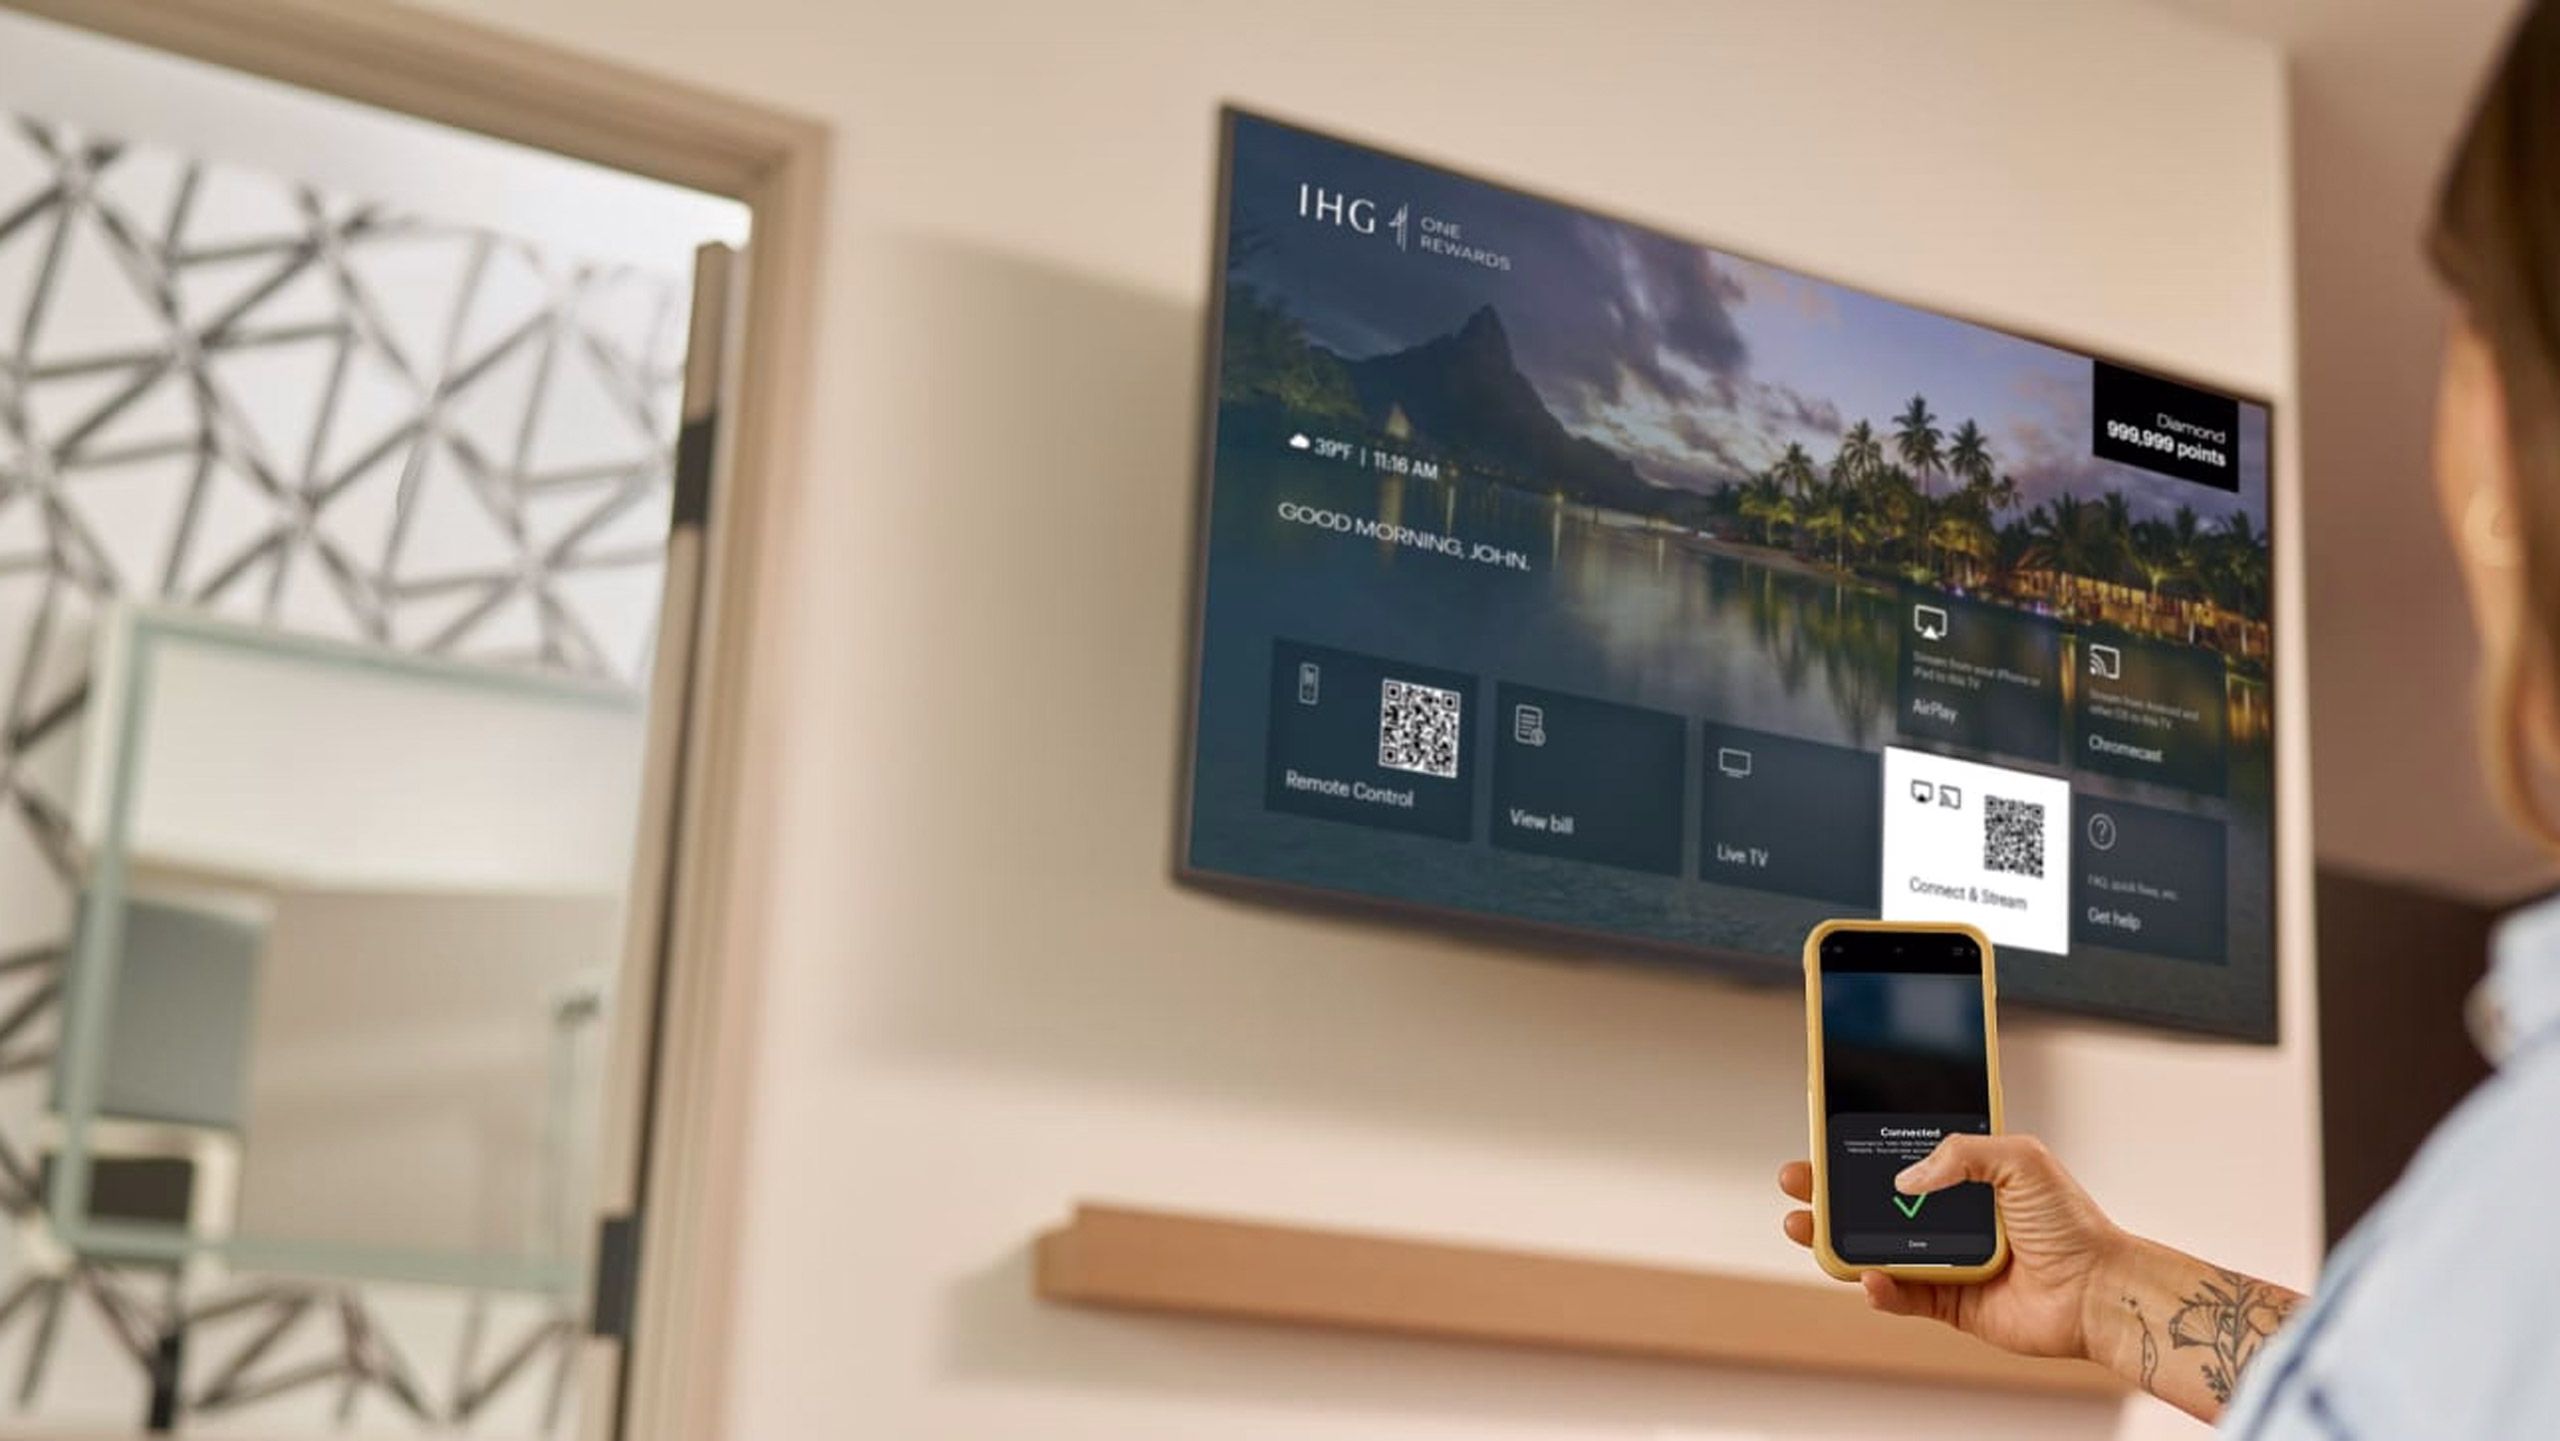 Apple brings AirPlay to select hotels